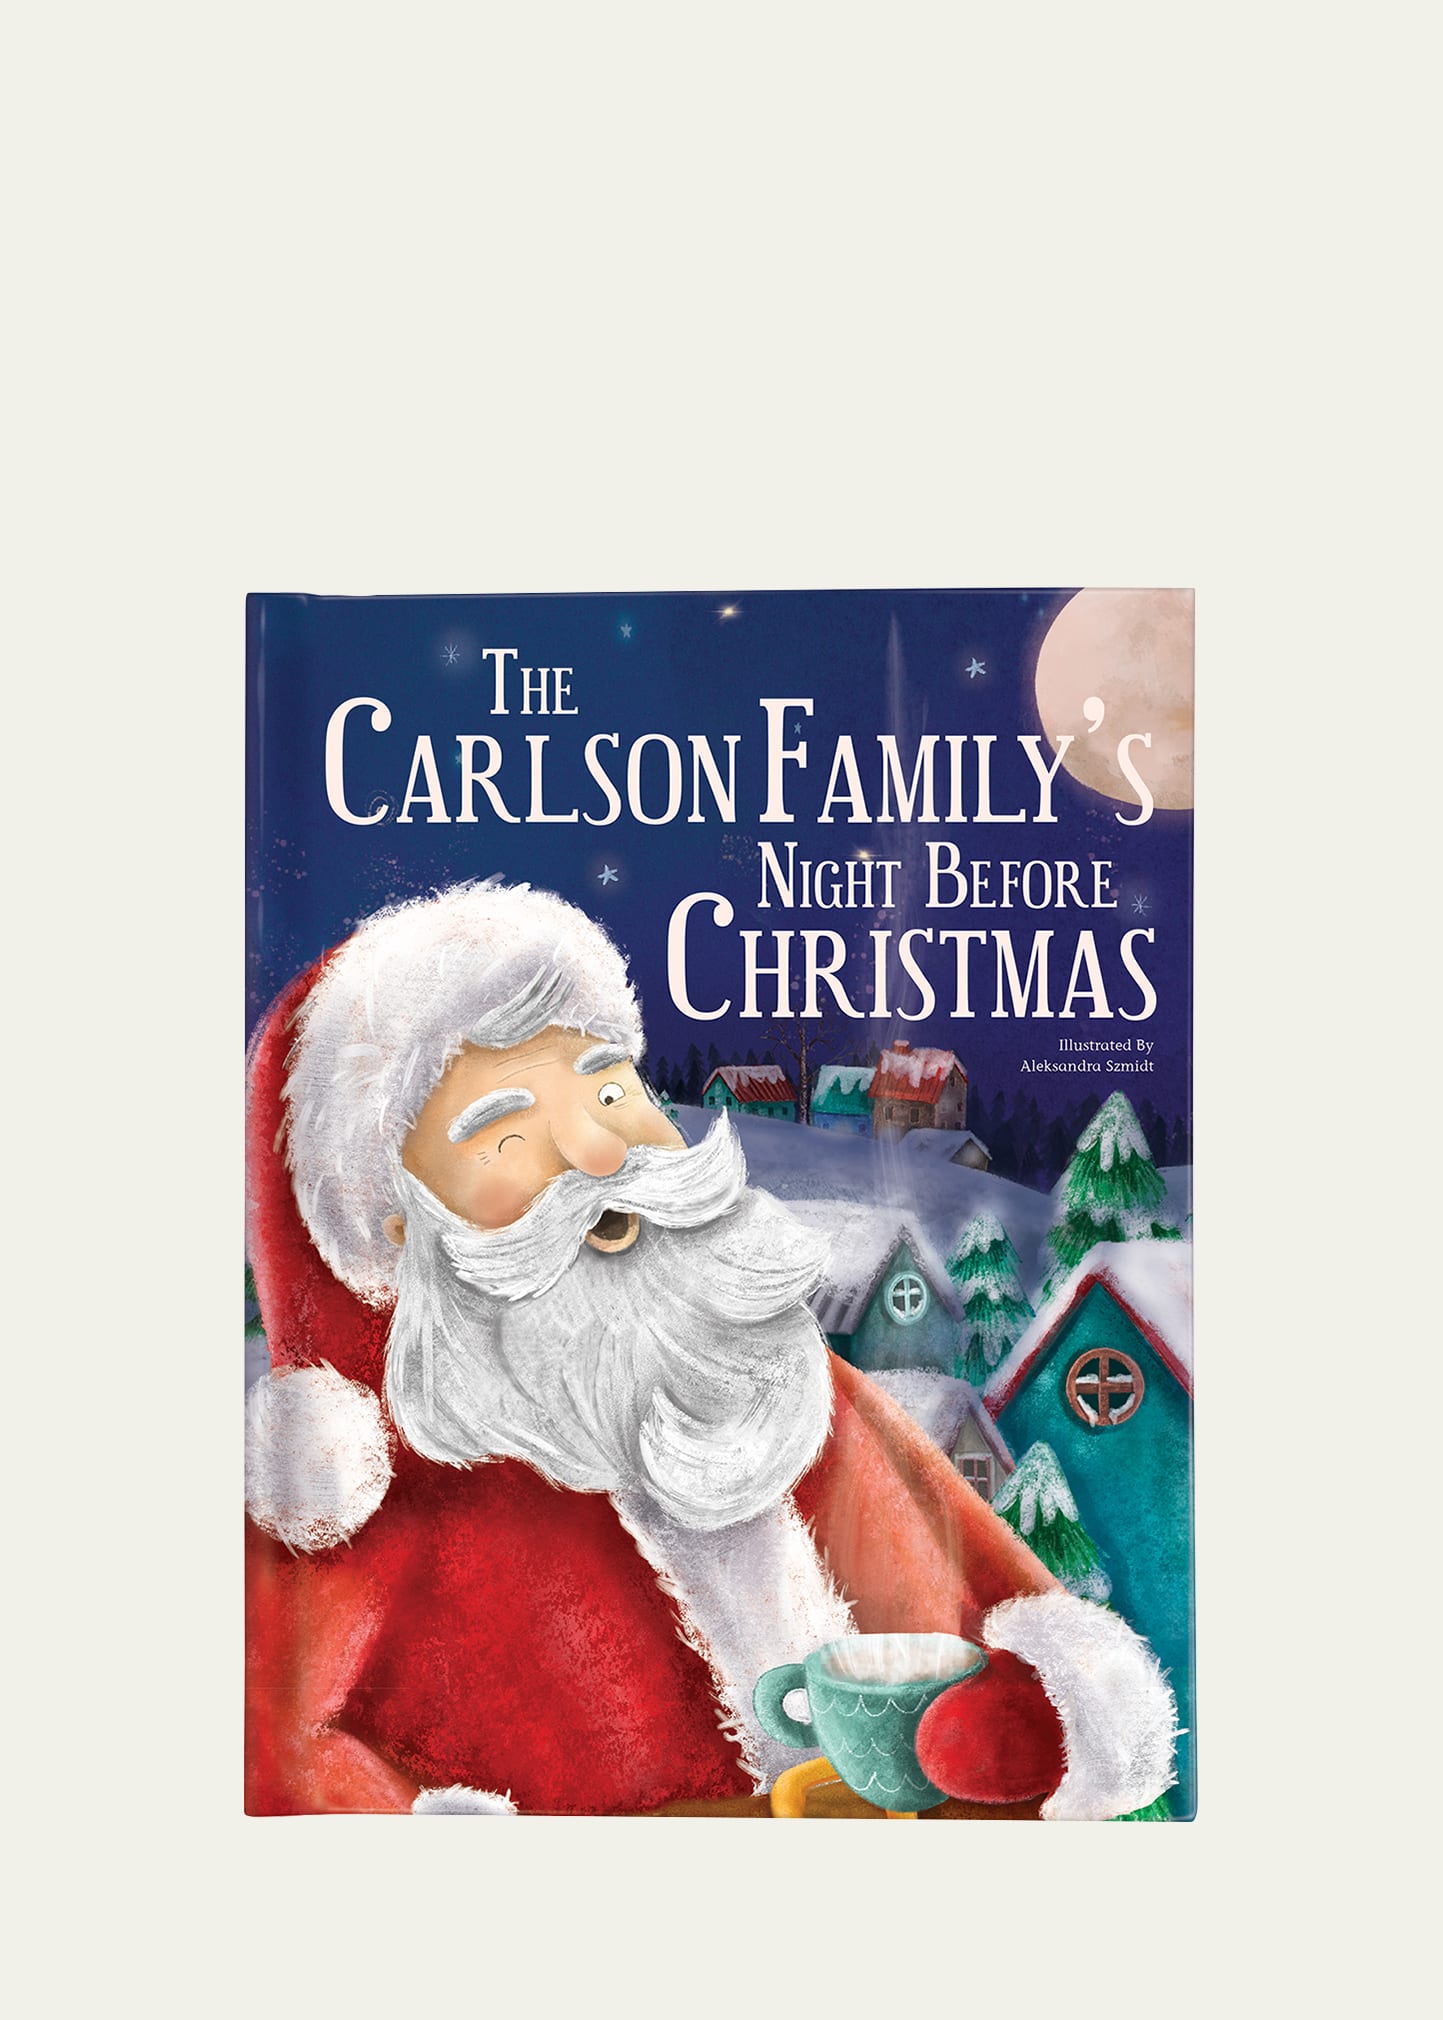 I See Me Kid's "Our Family's Night Before Christmas" Book, Personalized